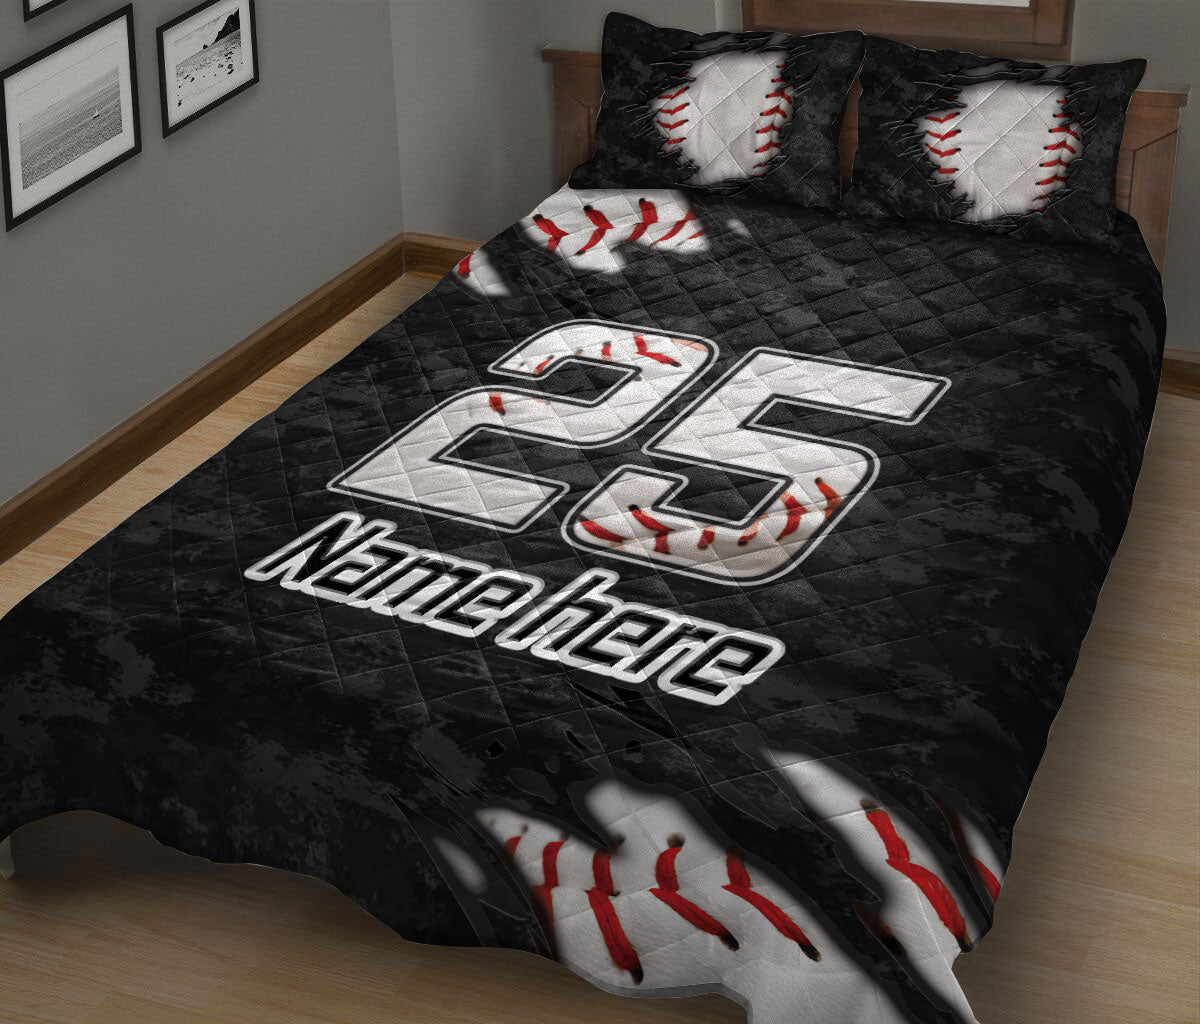 Ohaprints-Quilt-Bed-Set-Pillowcase-Baseball-Sport-White-Ball-Pattern-Black-Camo-Custom-Personalized-Name-Number-Blanket-Bedspread-Bedding-327-King (90'' x 100'')